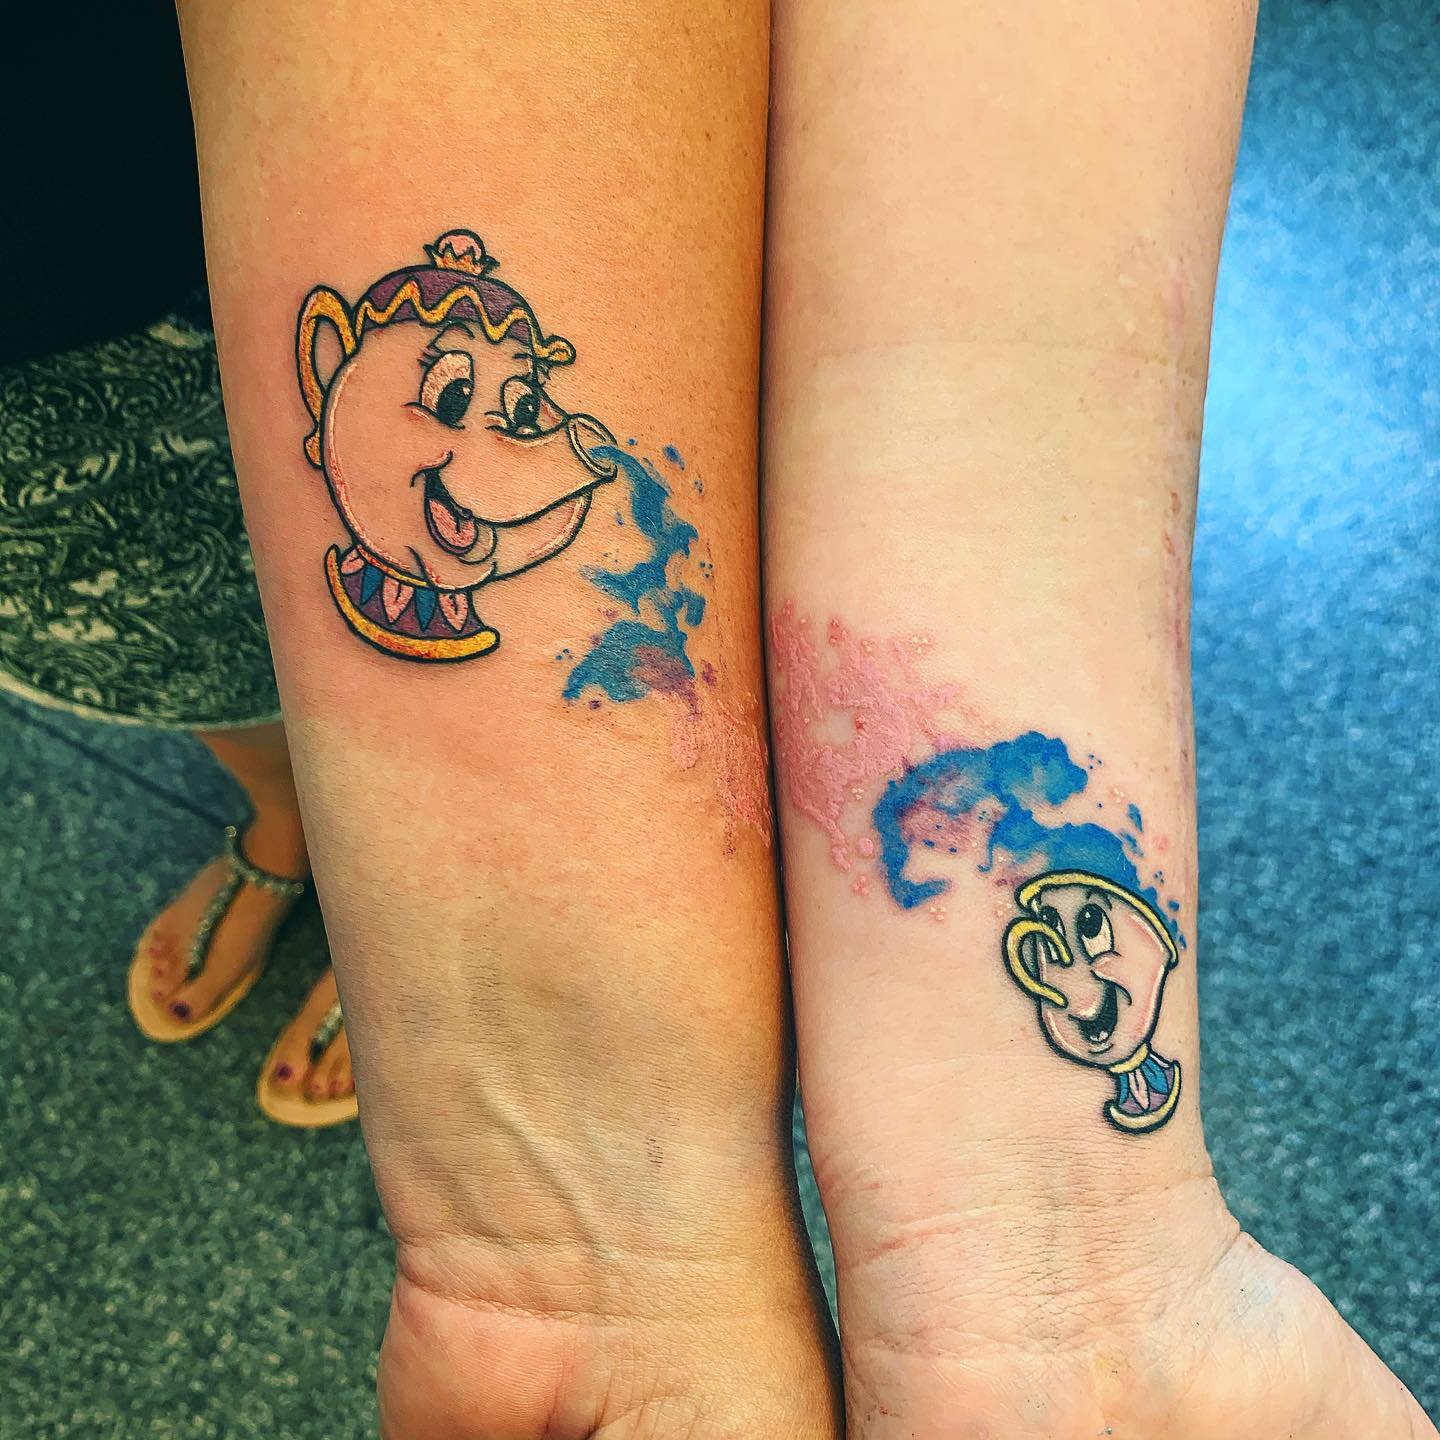 22 Creative Sister Tattoo Ideas With Meaning  Pulptastic